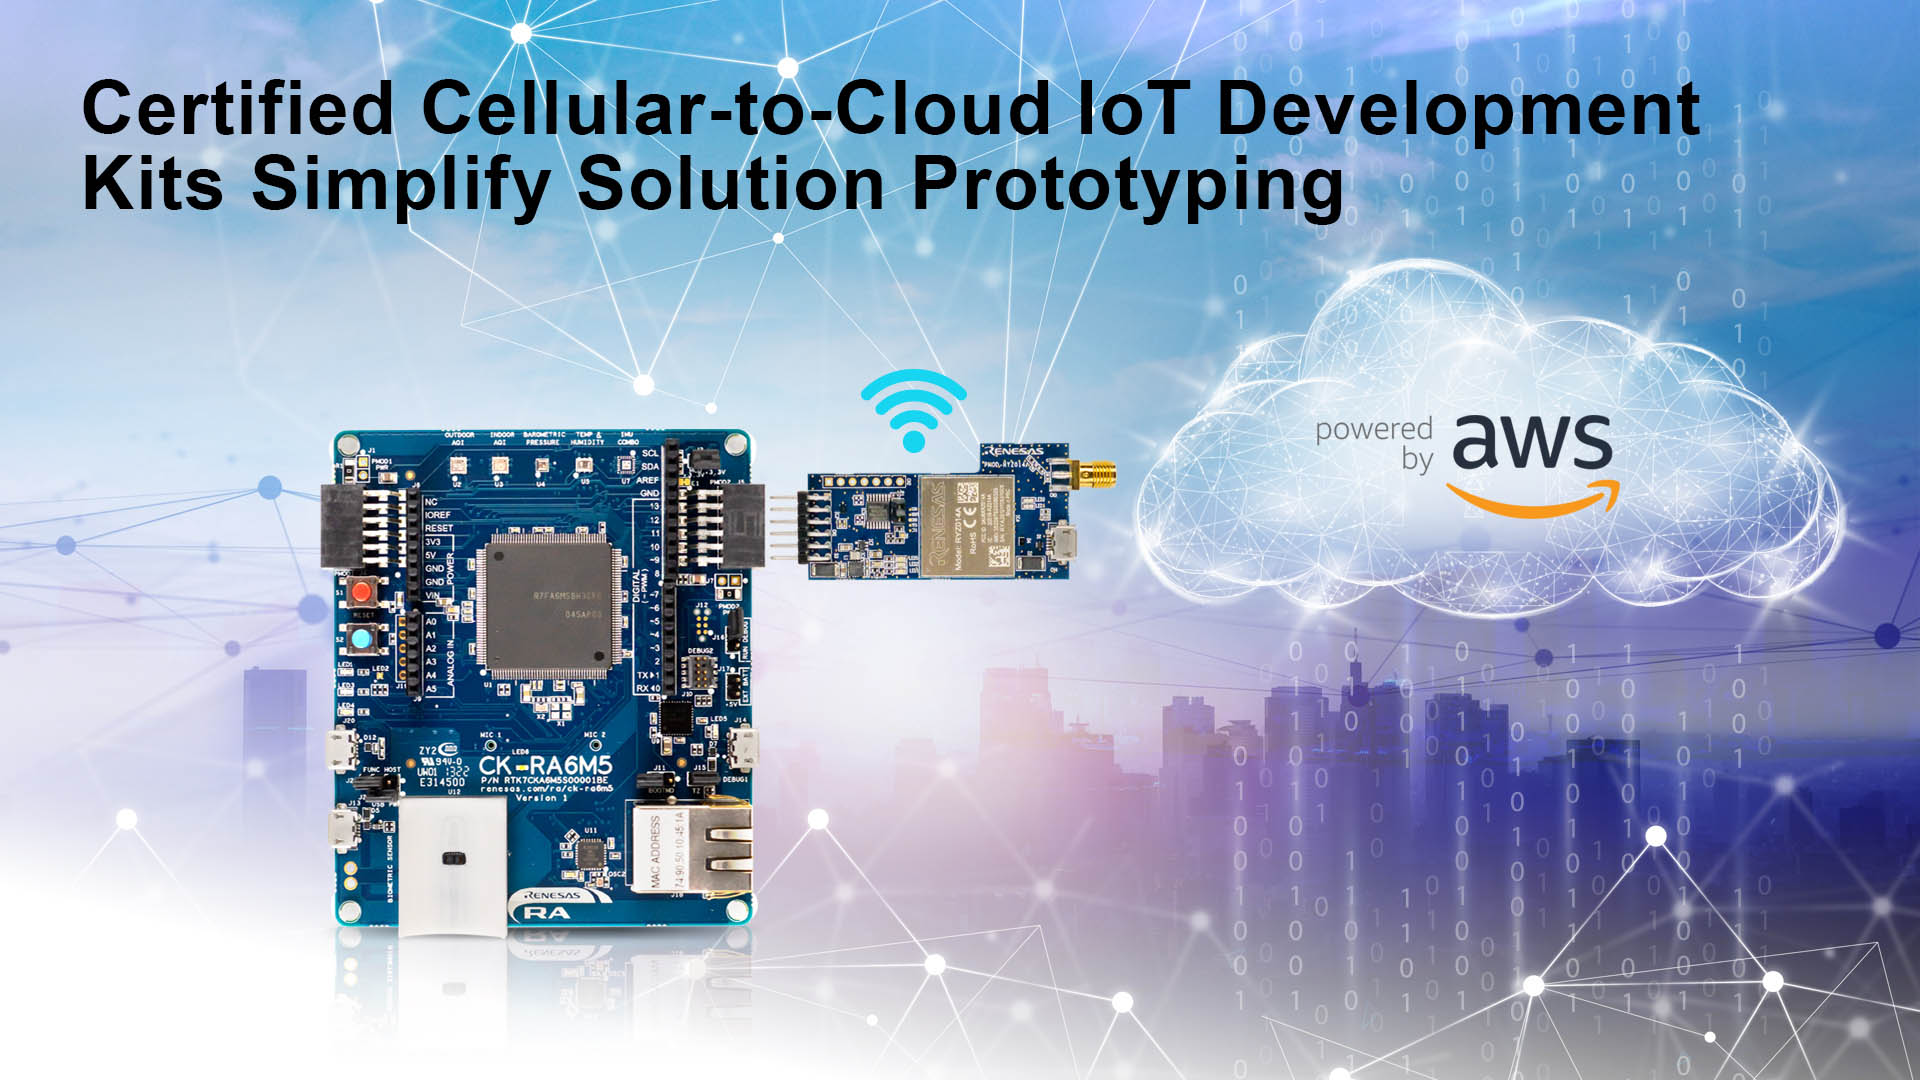 Cellular-to-Cloud IoT Development Platforms Powered by RA and RX MCU Families